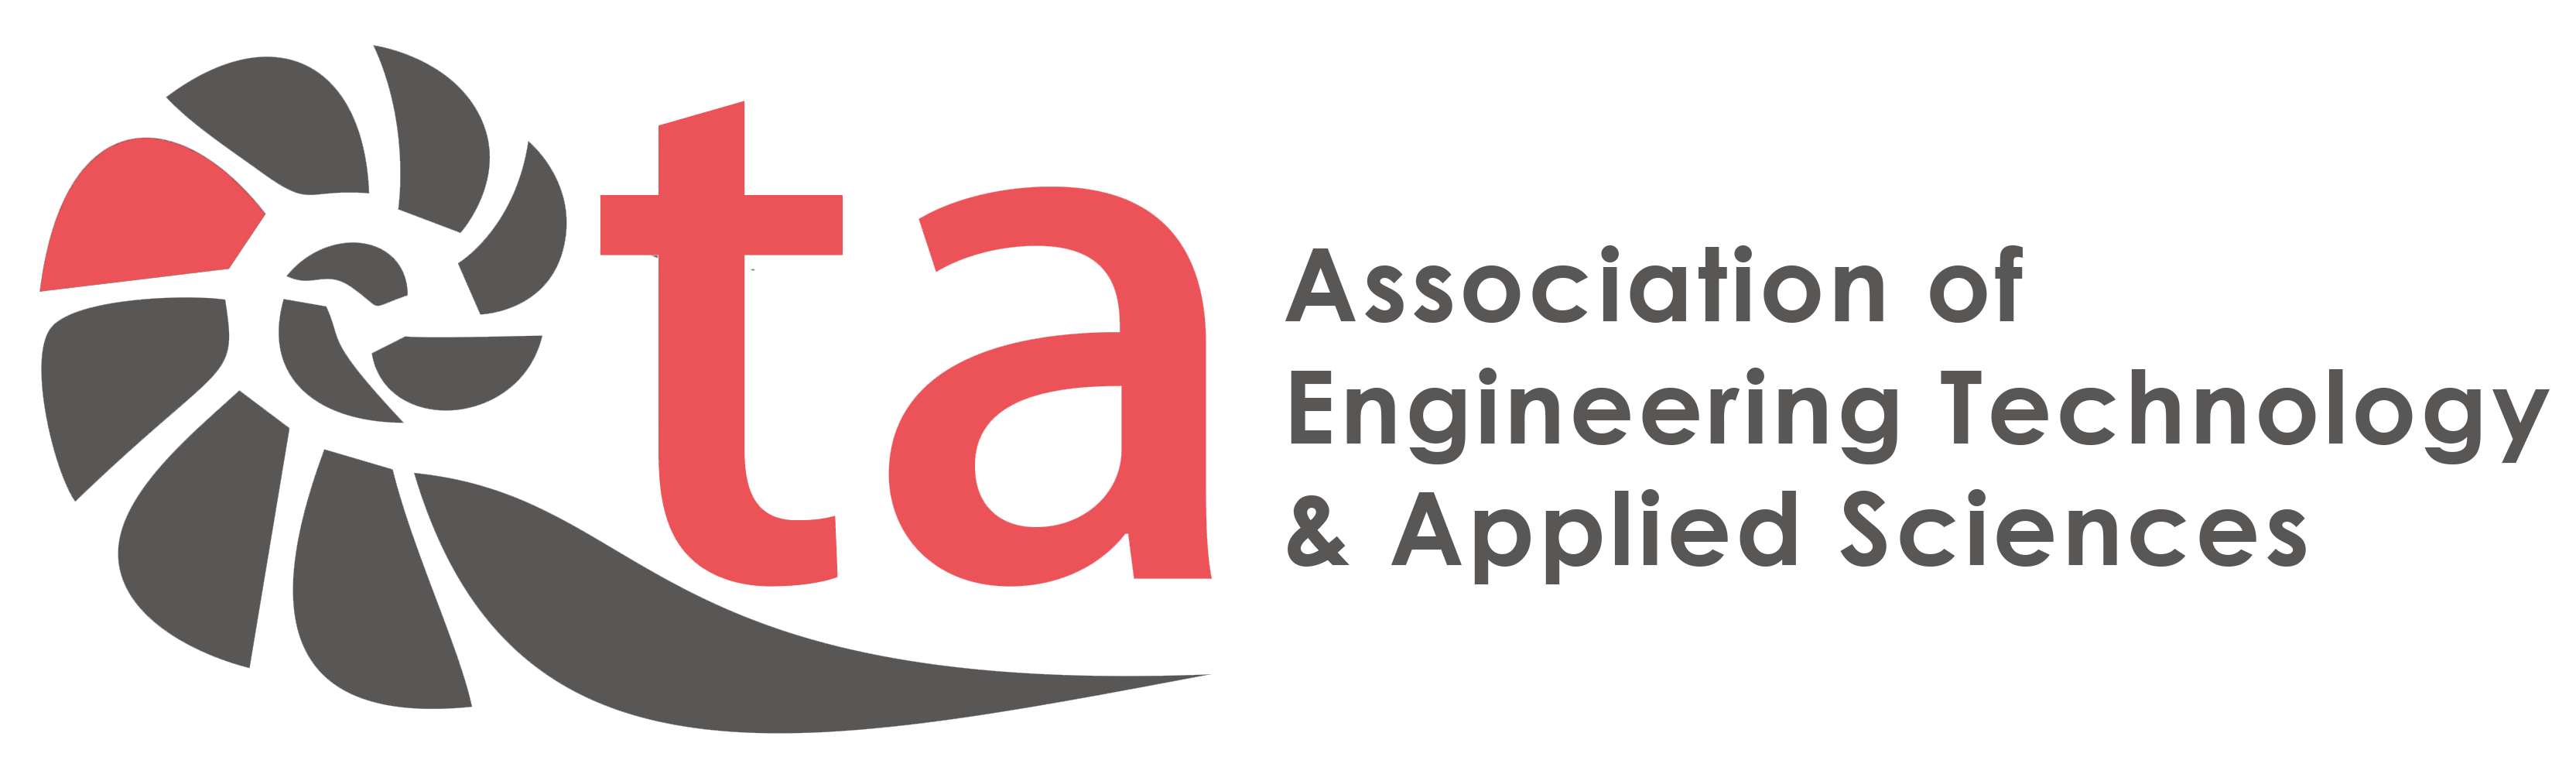 AETA International Conference on System Engineering, Information Technology, Computer Software & Applied Sciences SICA